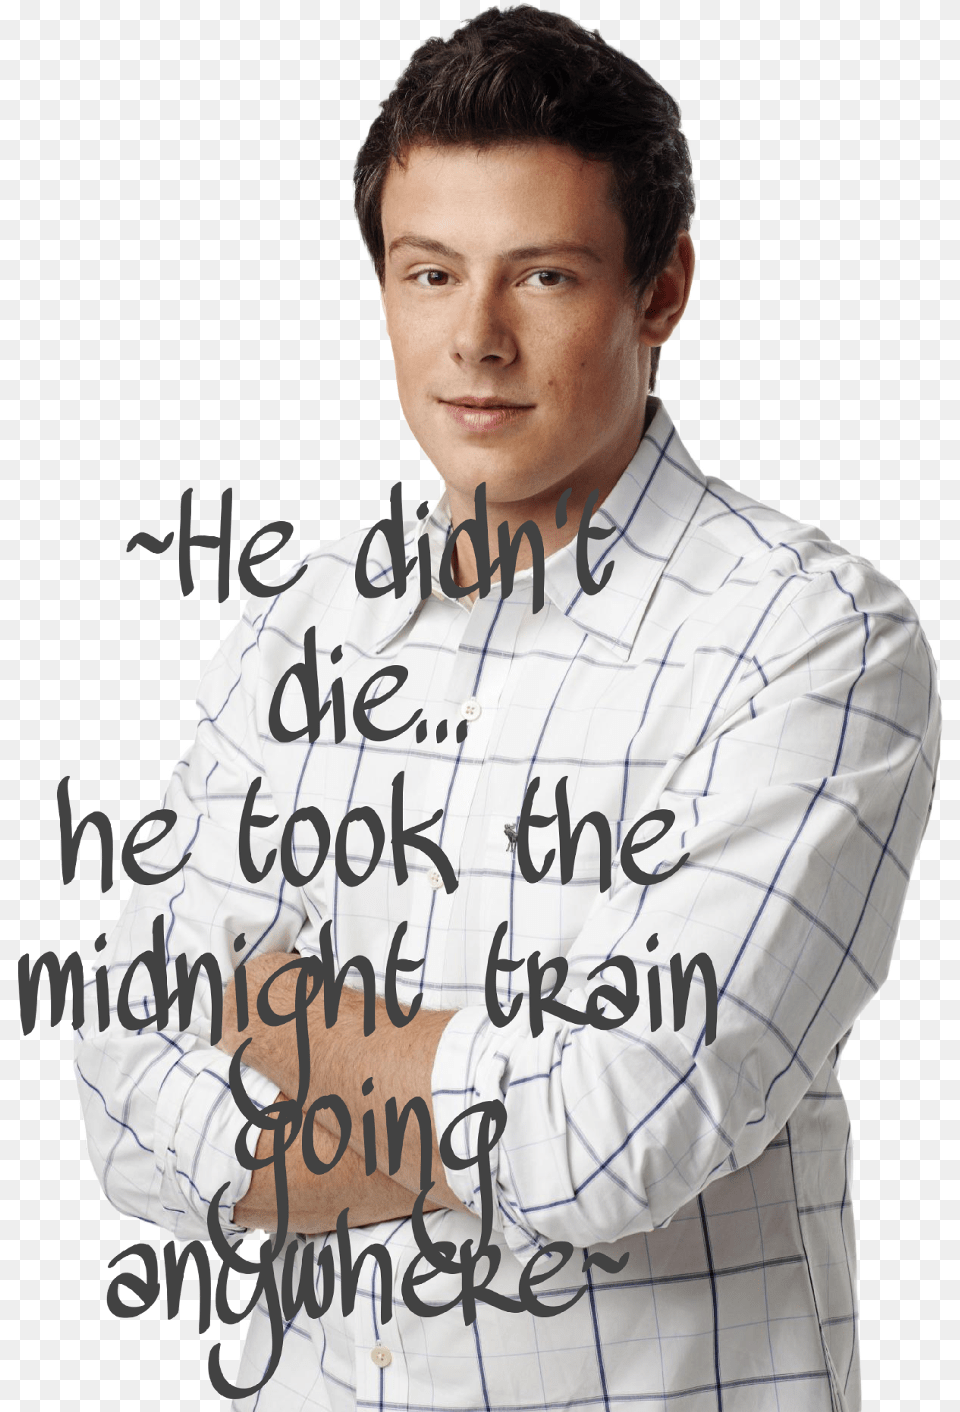 Corymonteith Finn From Glee, Clothing, Shirt, Adult, Portrait Free Transparent Png